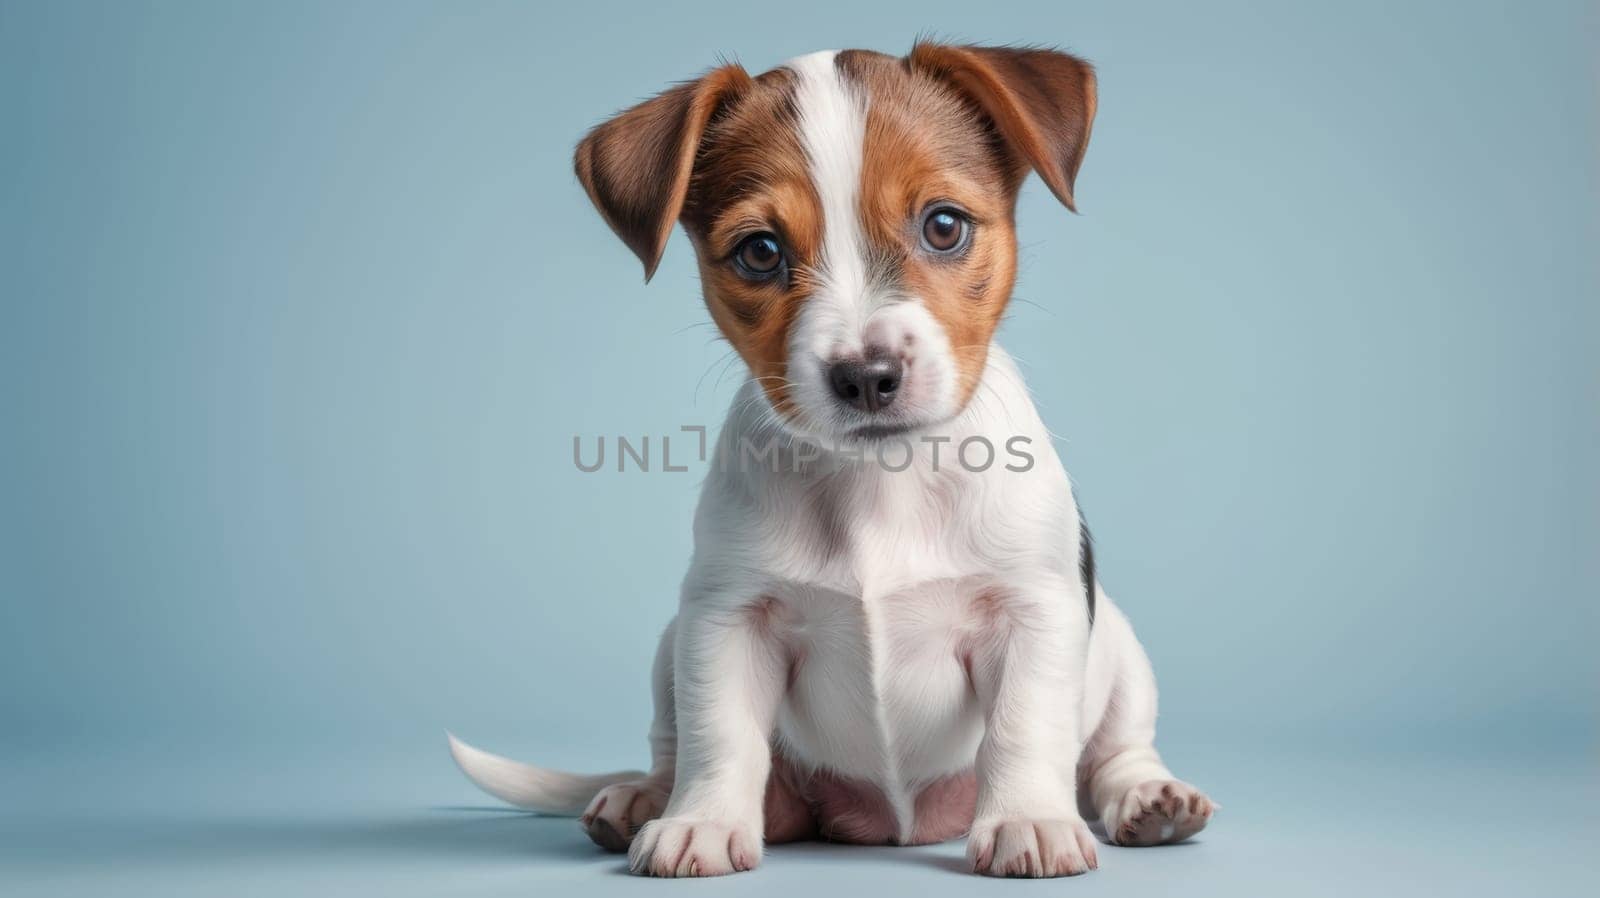 Funny Jack Russell puppy on a blue background.